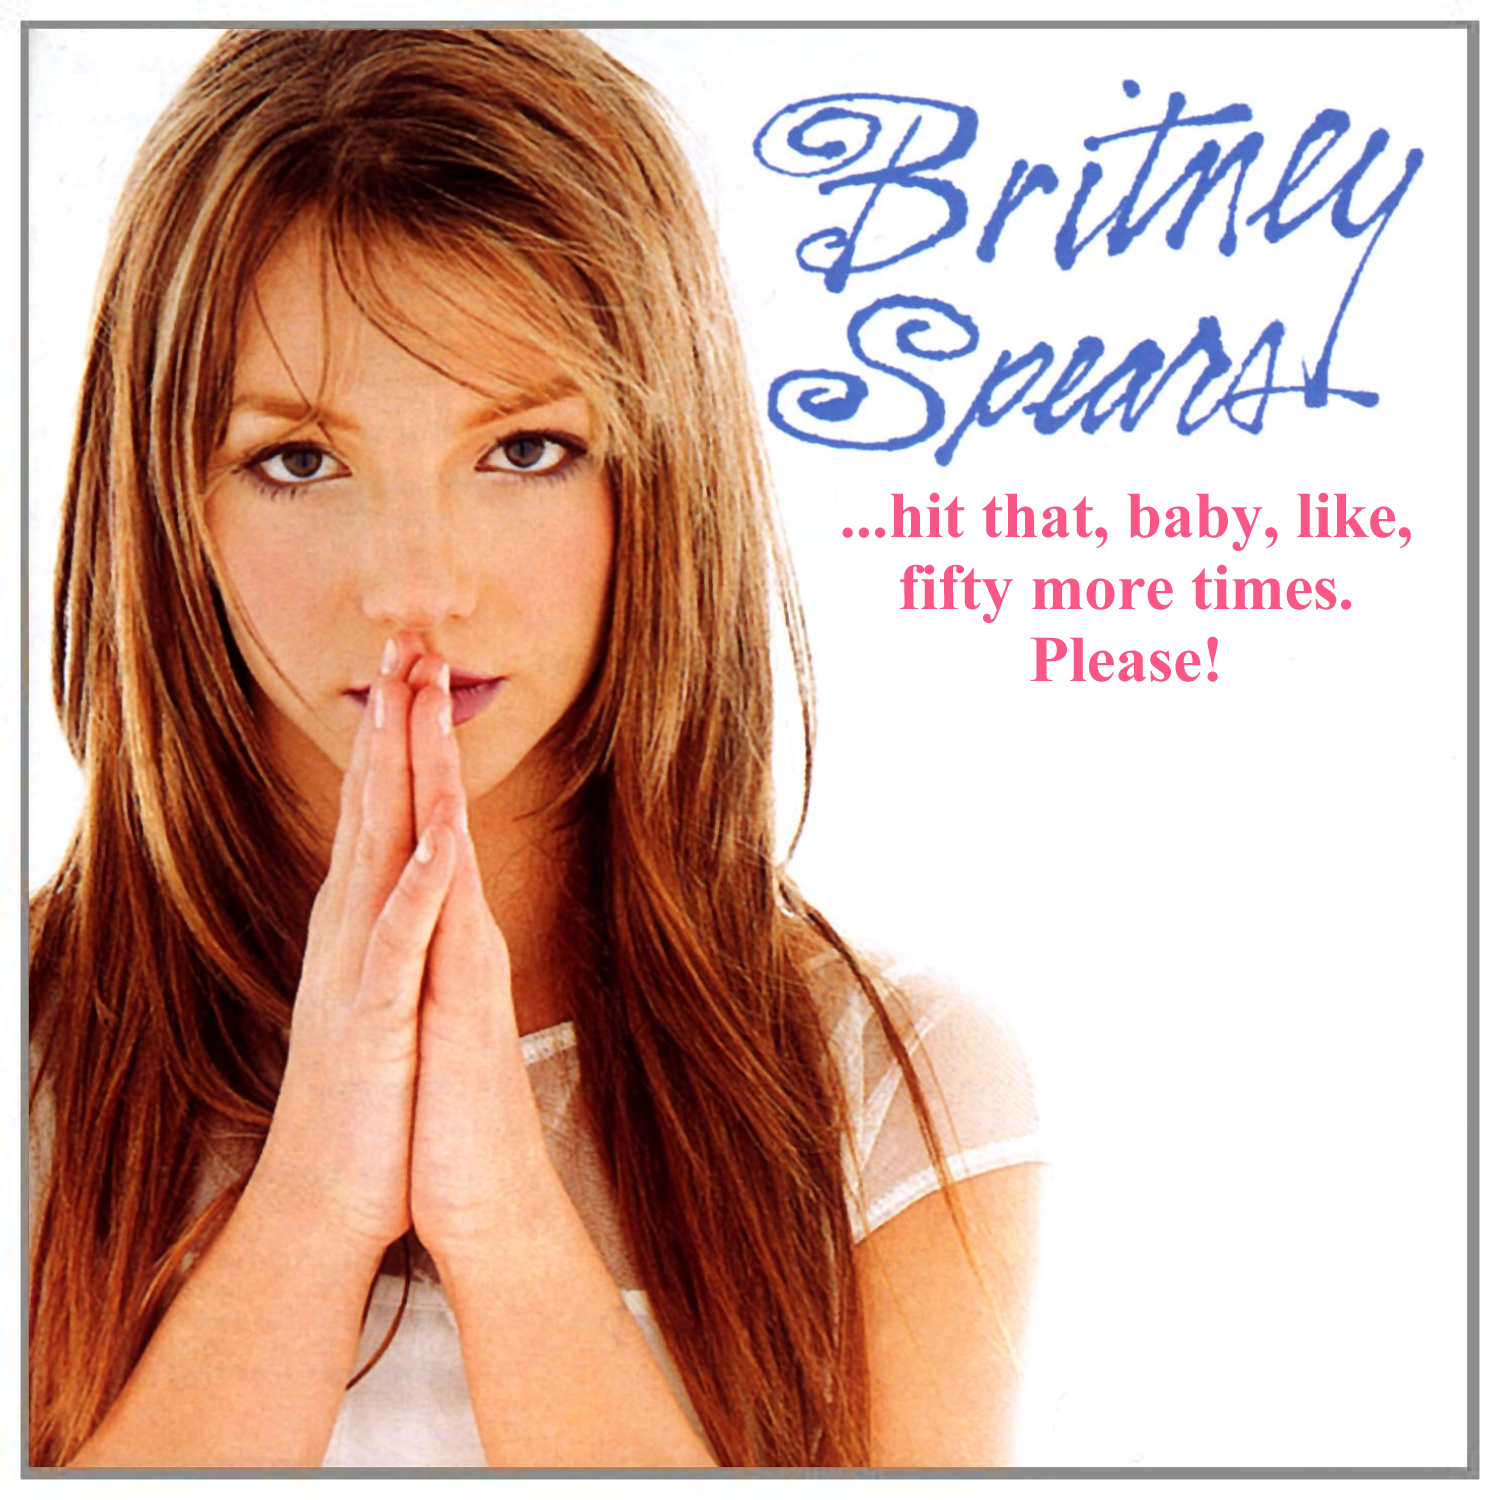 Album cover parody of Baby One More Time by BRITNEY SPEARS